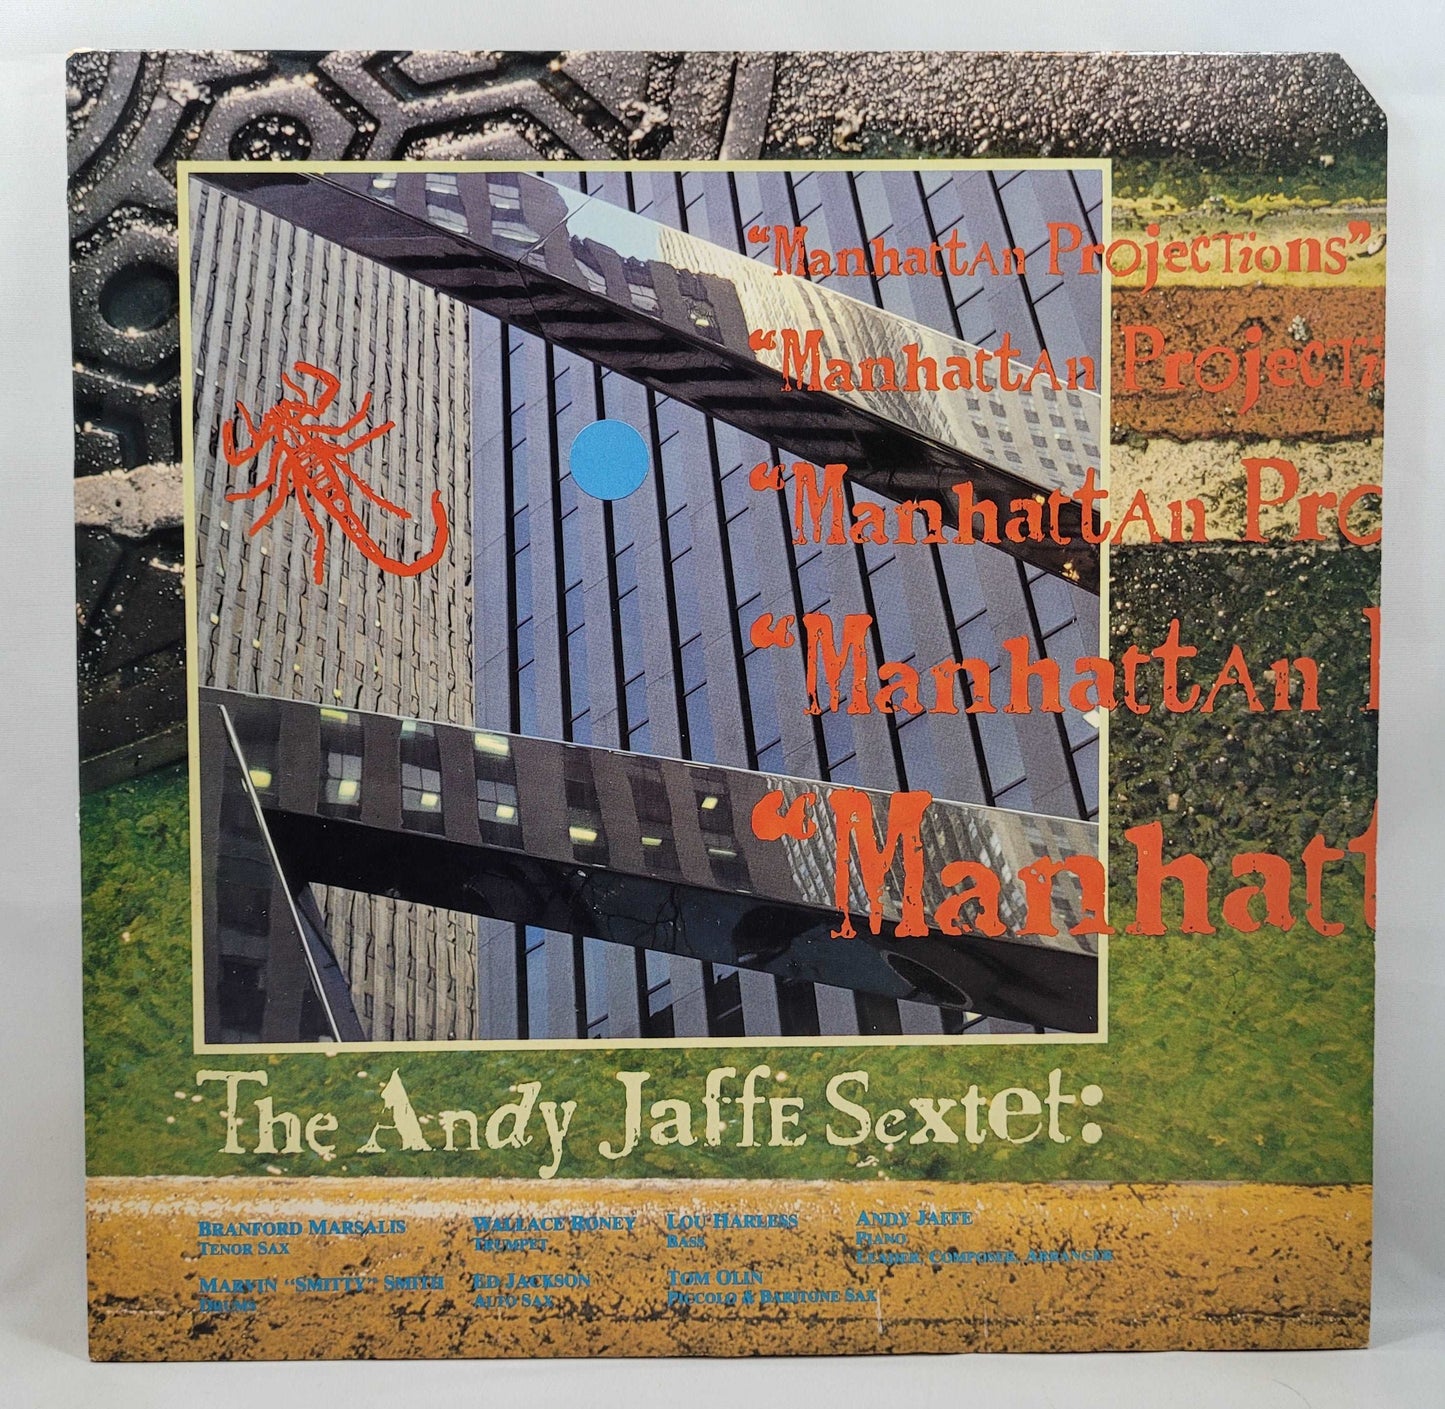 The Andy Jaffe Sextet - Manhattan Projections [1985 Used Vinyl Record LP]